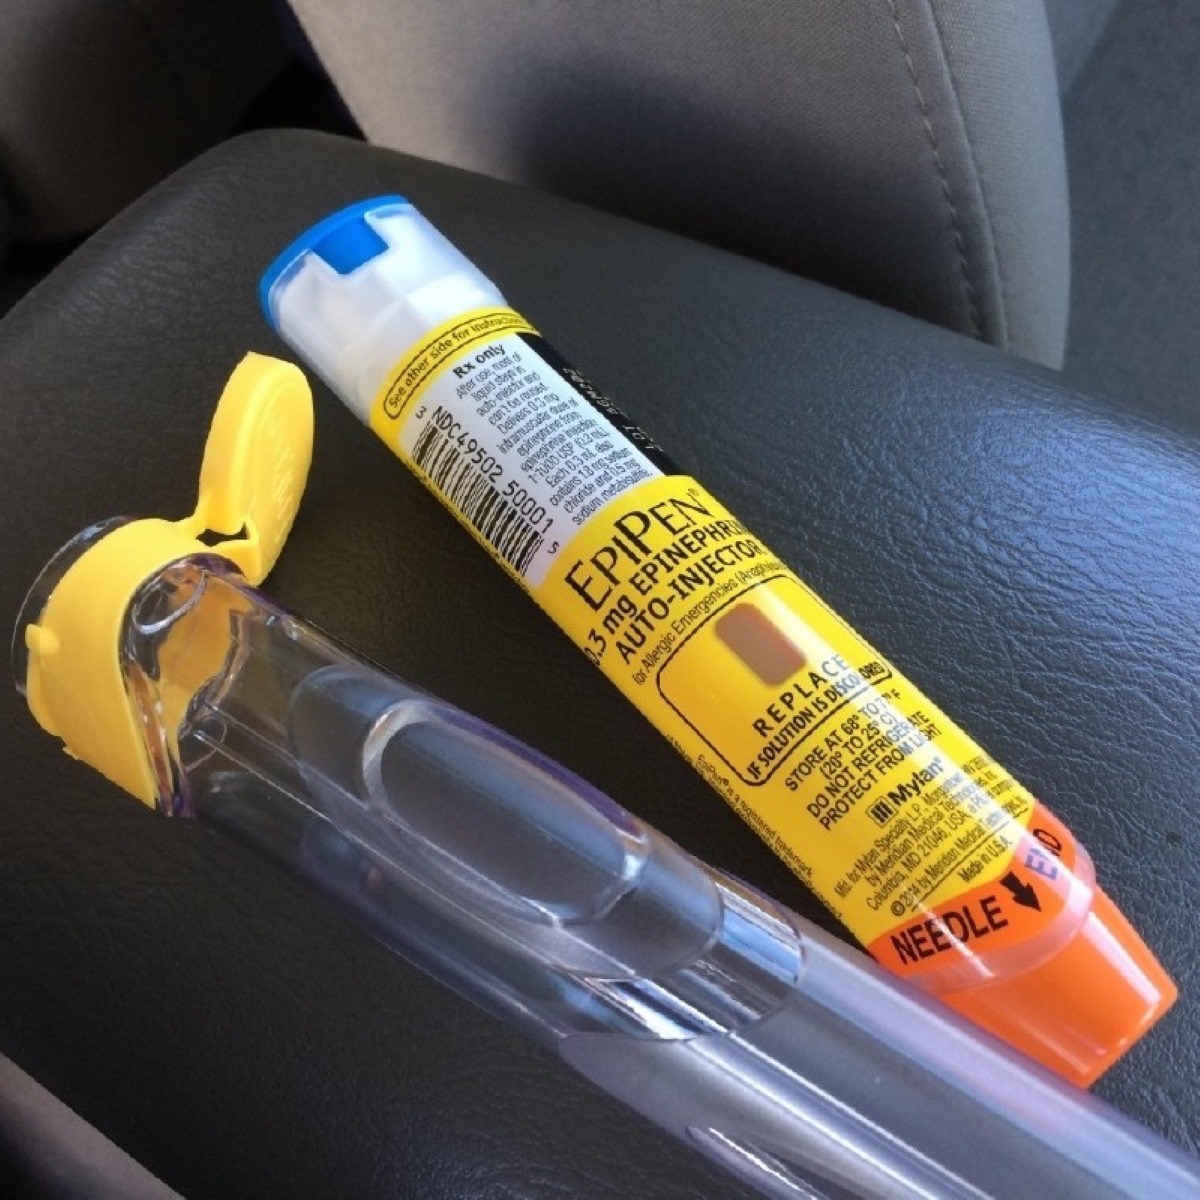 How To Store Epipen In Car